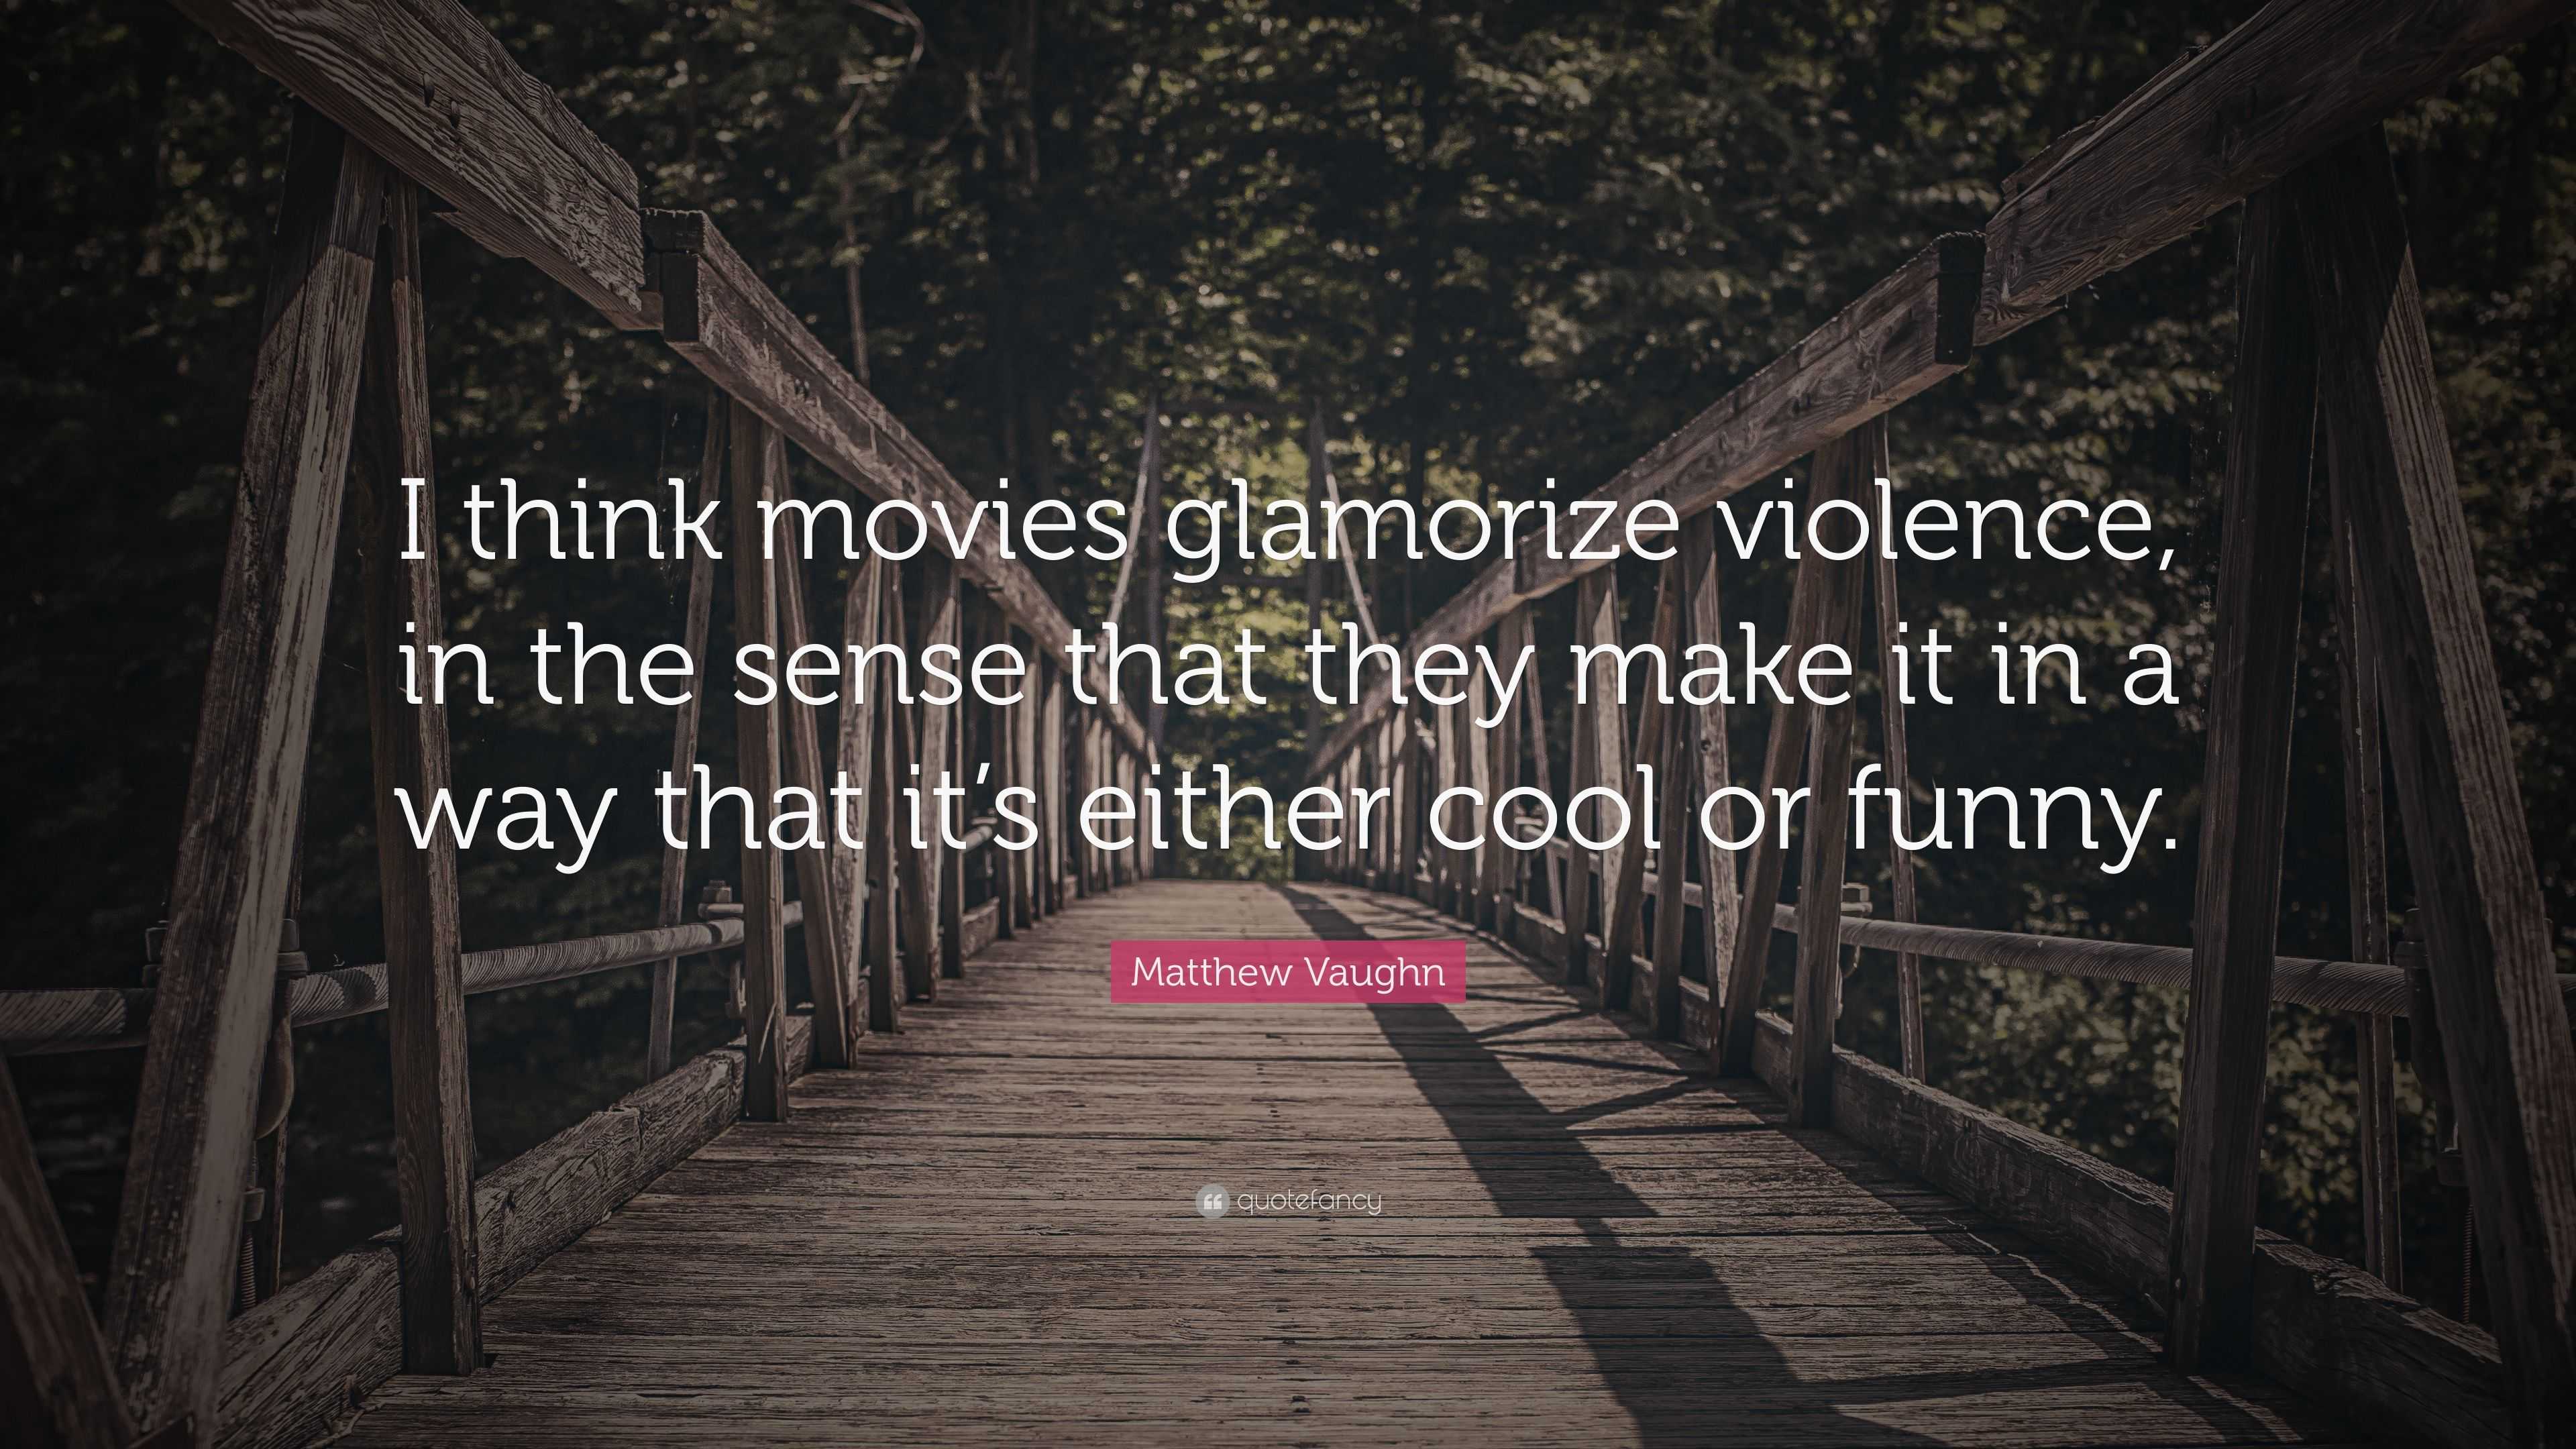 Matthew Vaughn Quote: “I think movies glamorize violence, in the sense that  they make it in